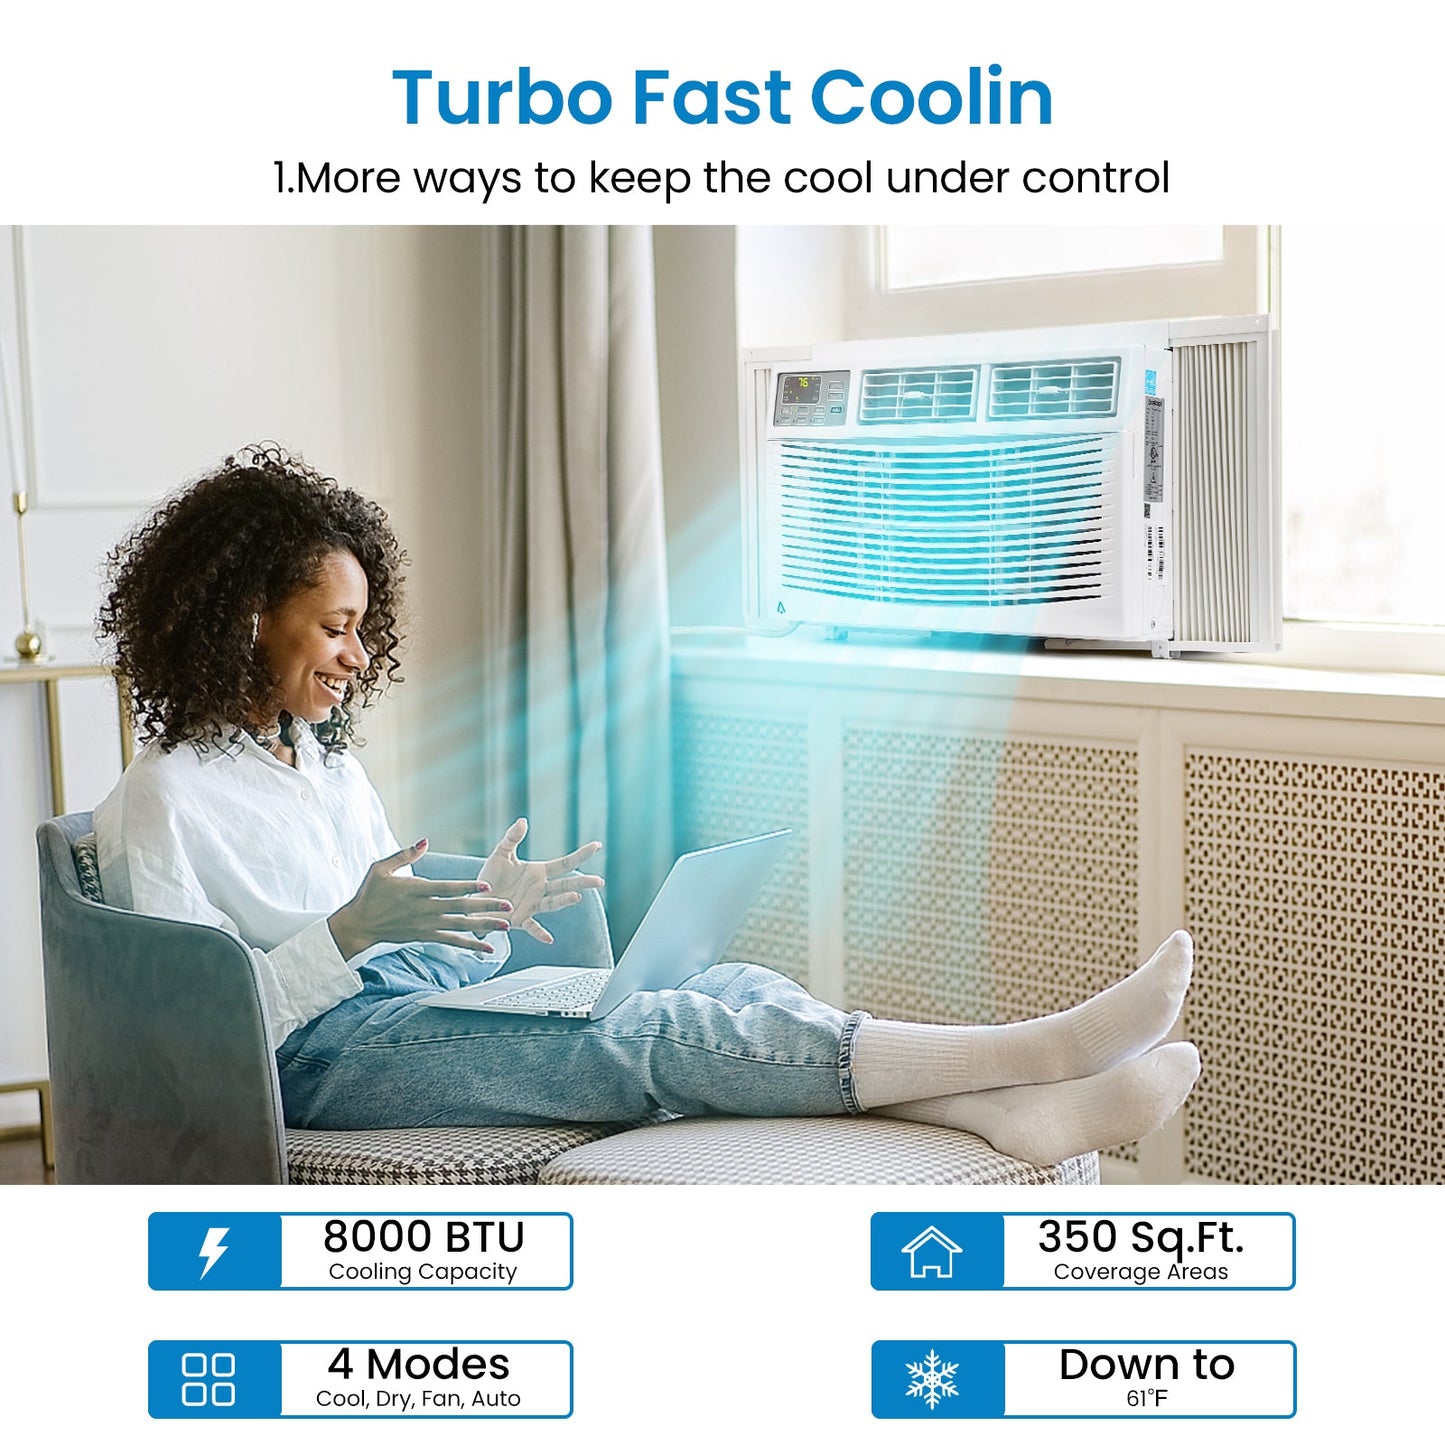 GARVEE 8000BTU Air Conditioner Turbo Fast Cooling AC Unit with Remote/App Control Flexible Window Opening